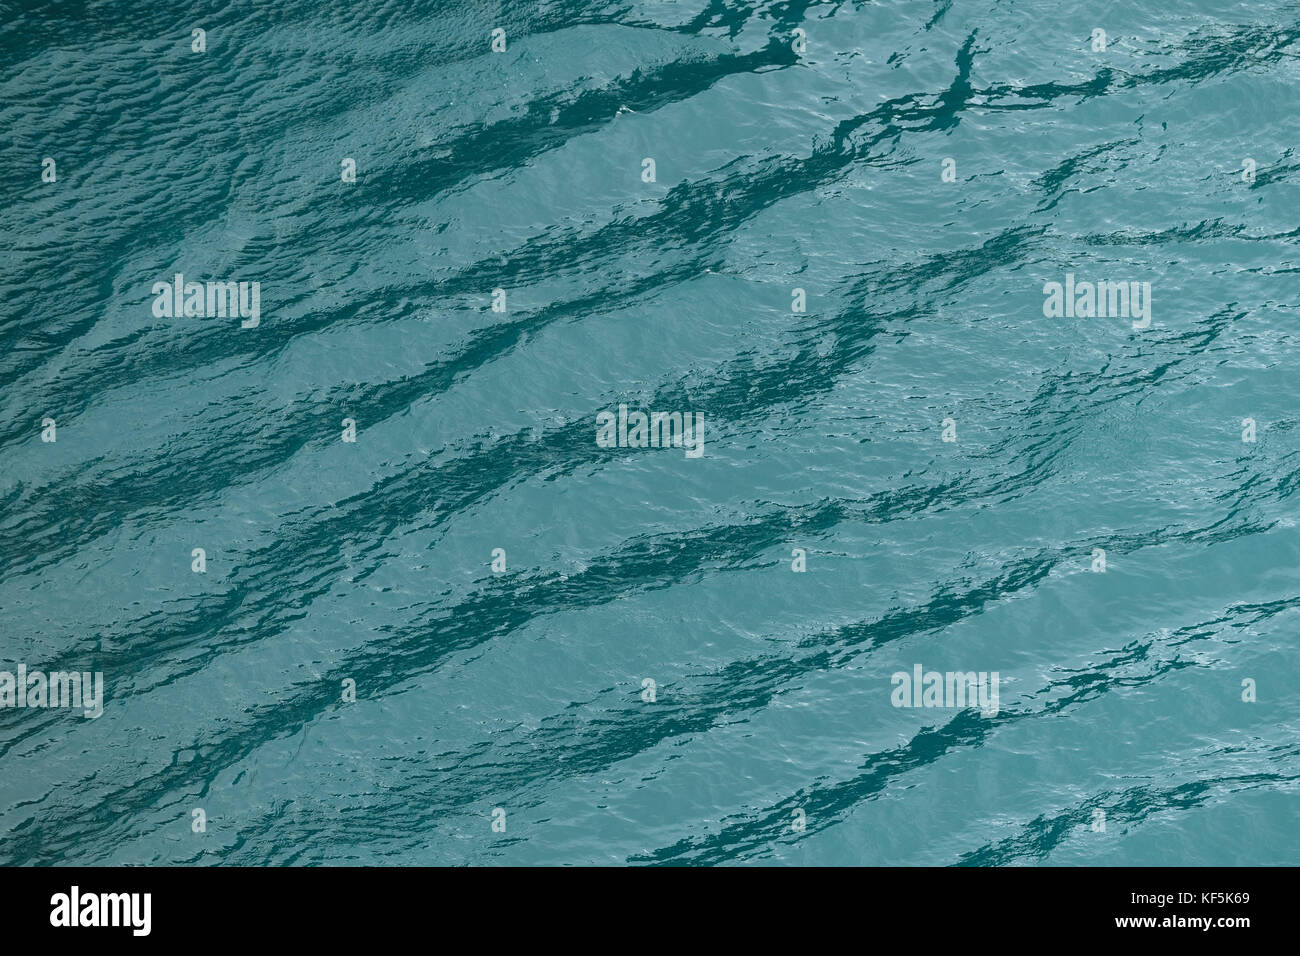 Water surface, small waves on a lake, Iceland Stock Photo